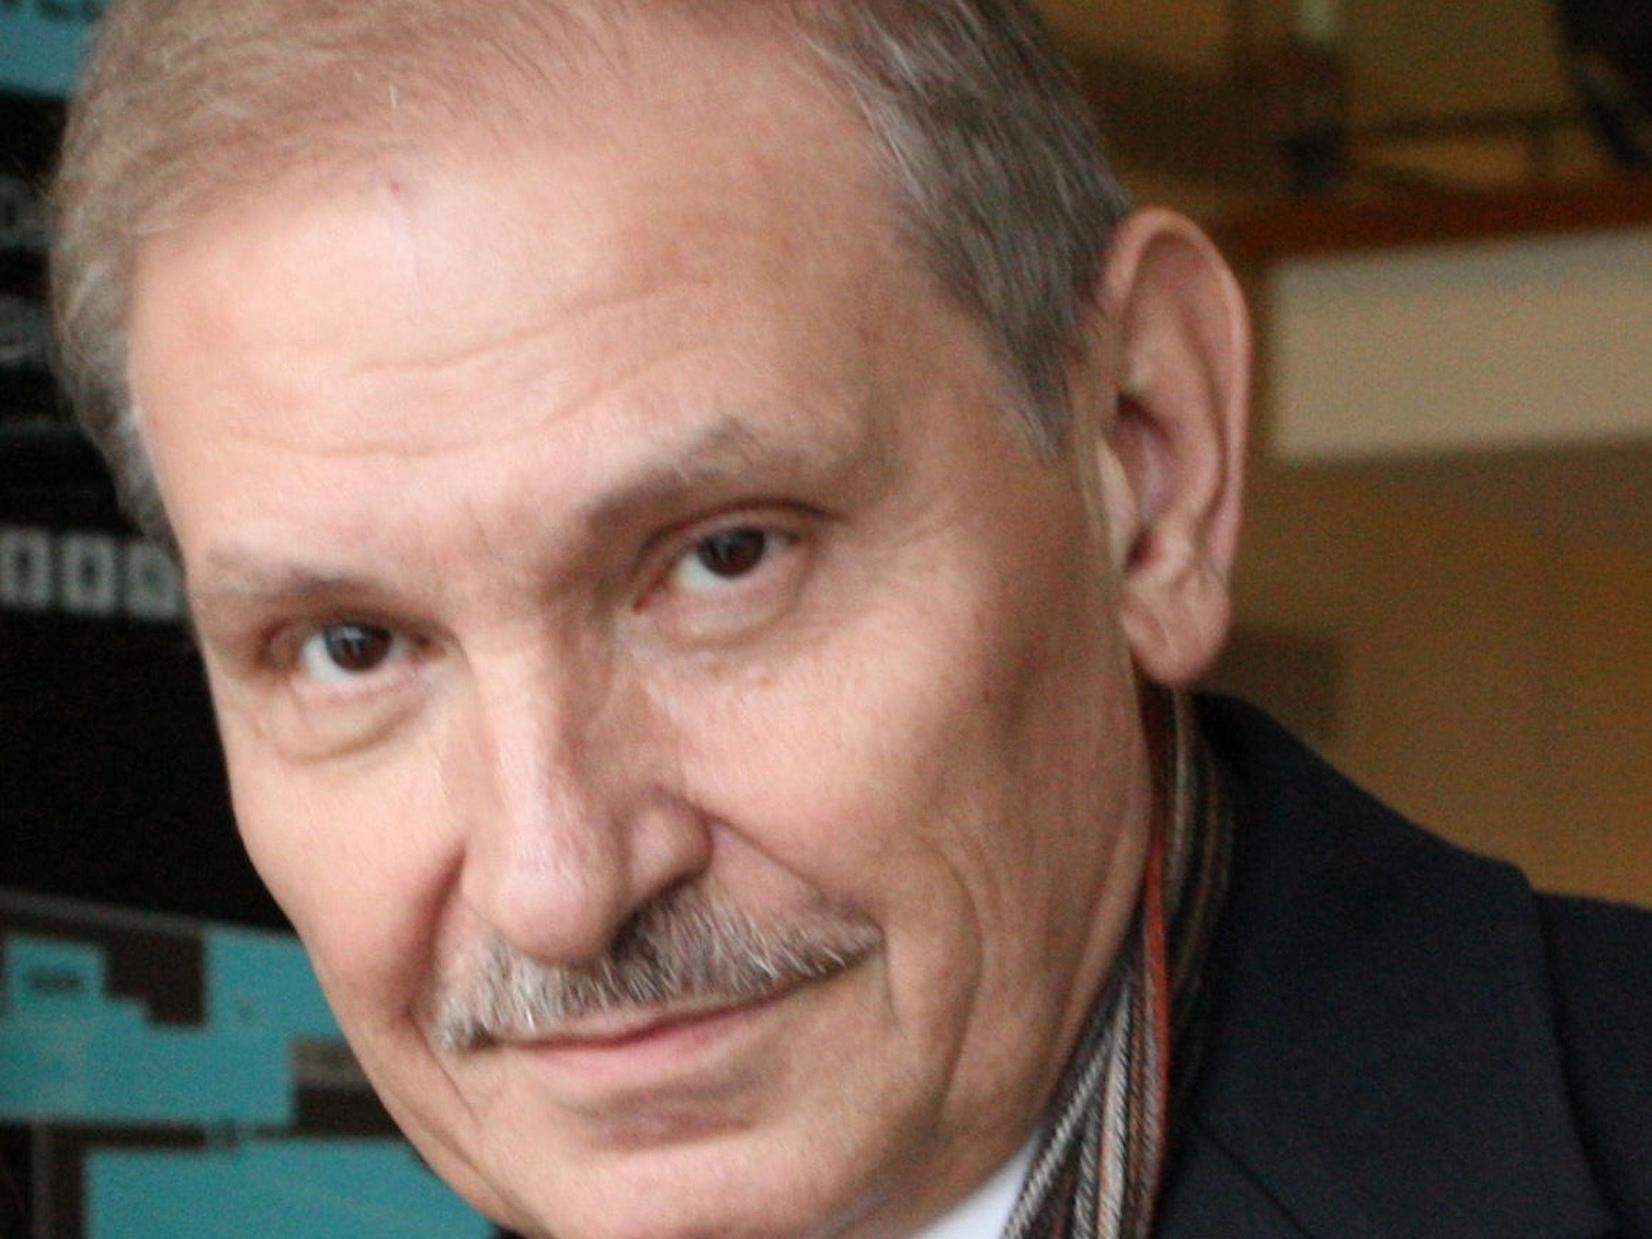 Nikolai Glushkov was found dead at his home in early March